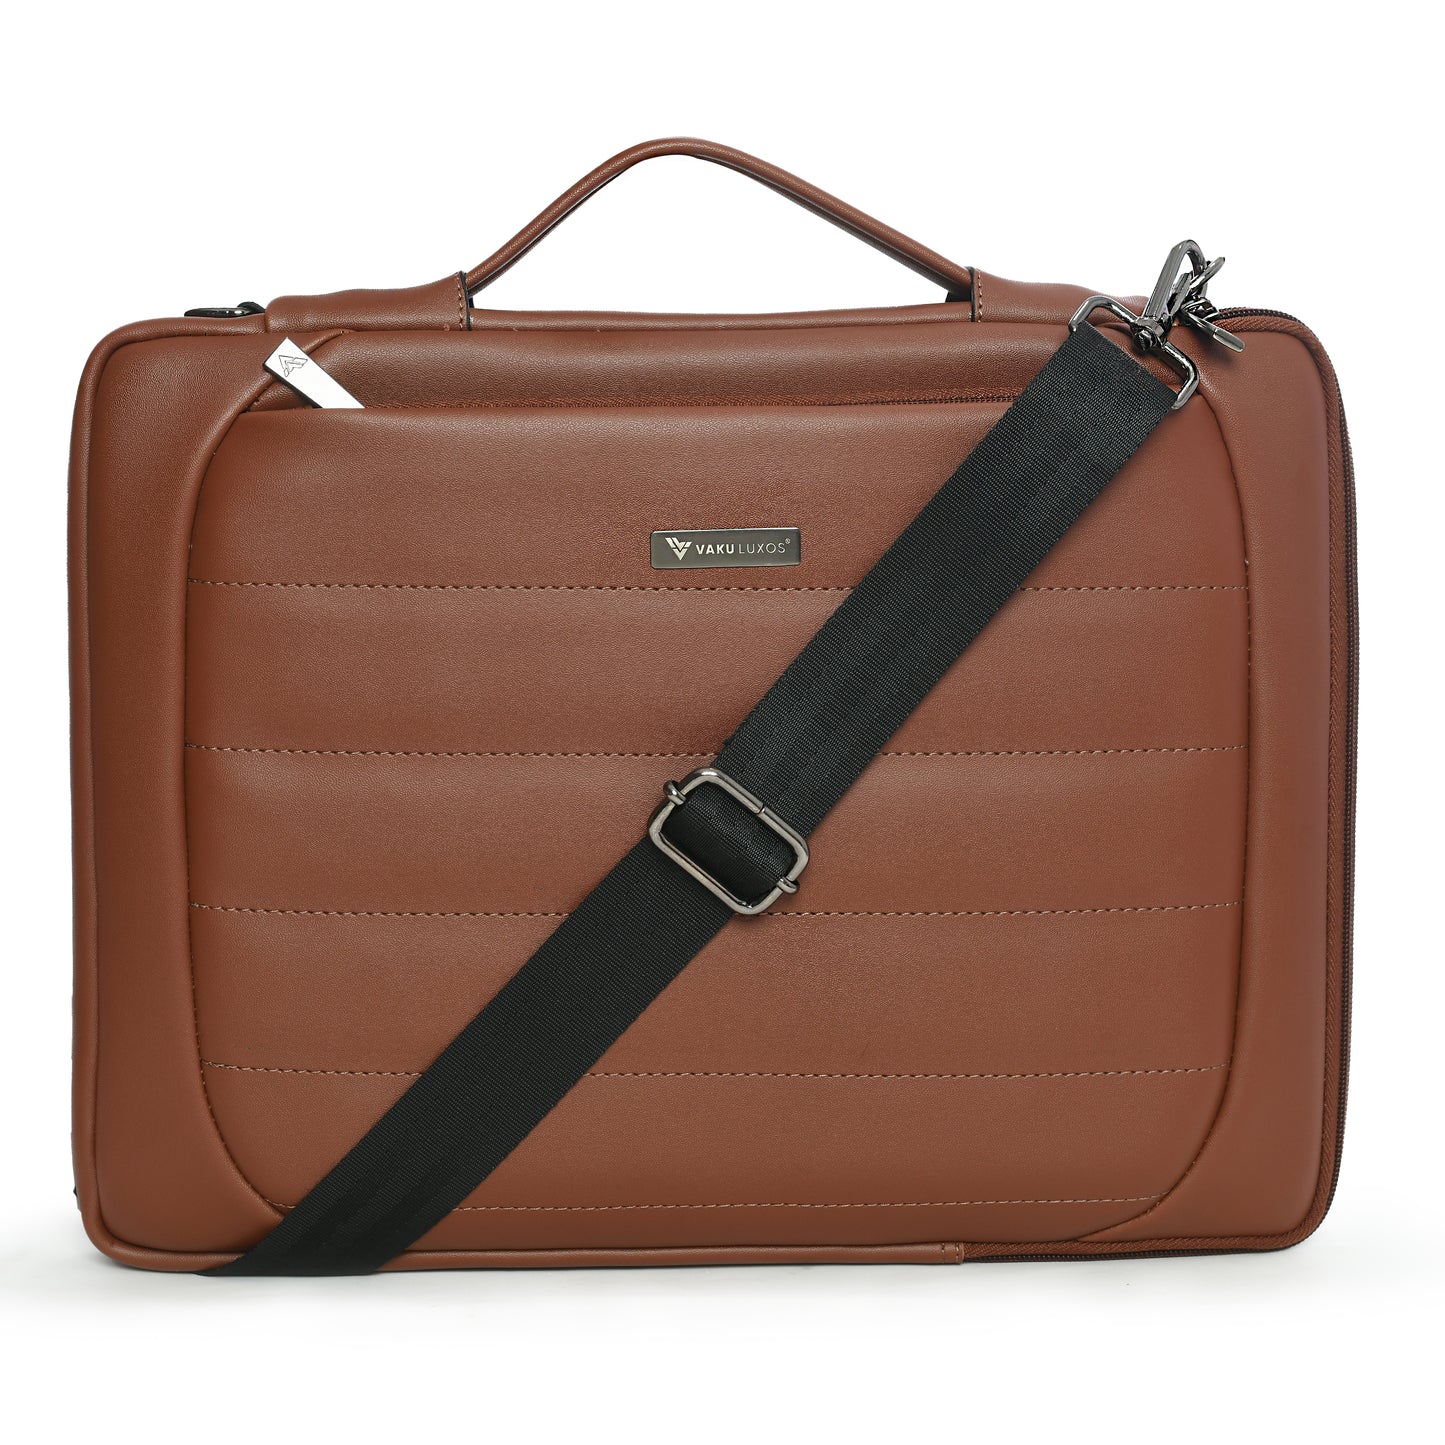 Vaku Luxos Lasa Chivelle Premium Collection Sleeve for MacBook 13"/14" with Strap - Tan Brown